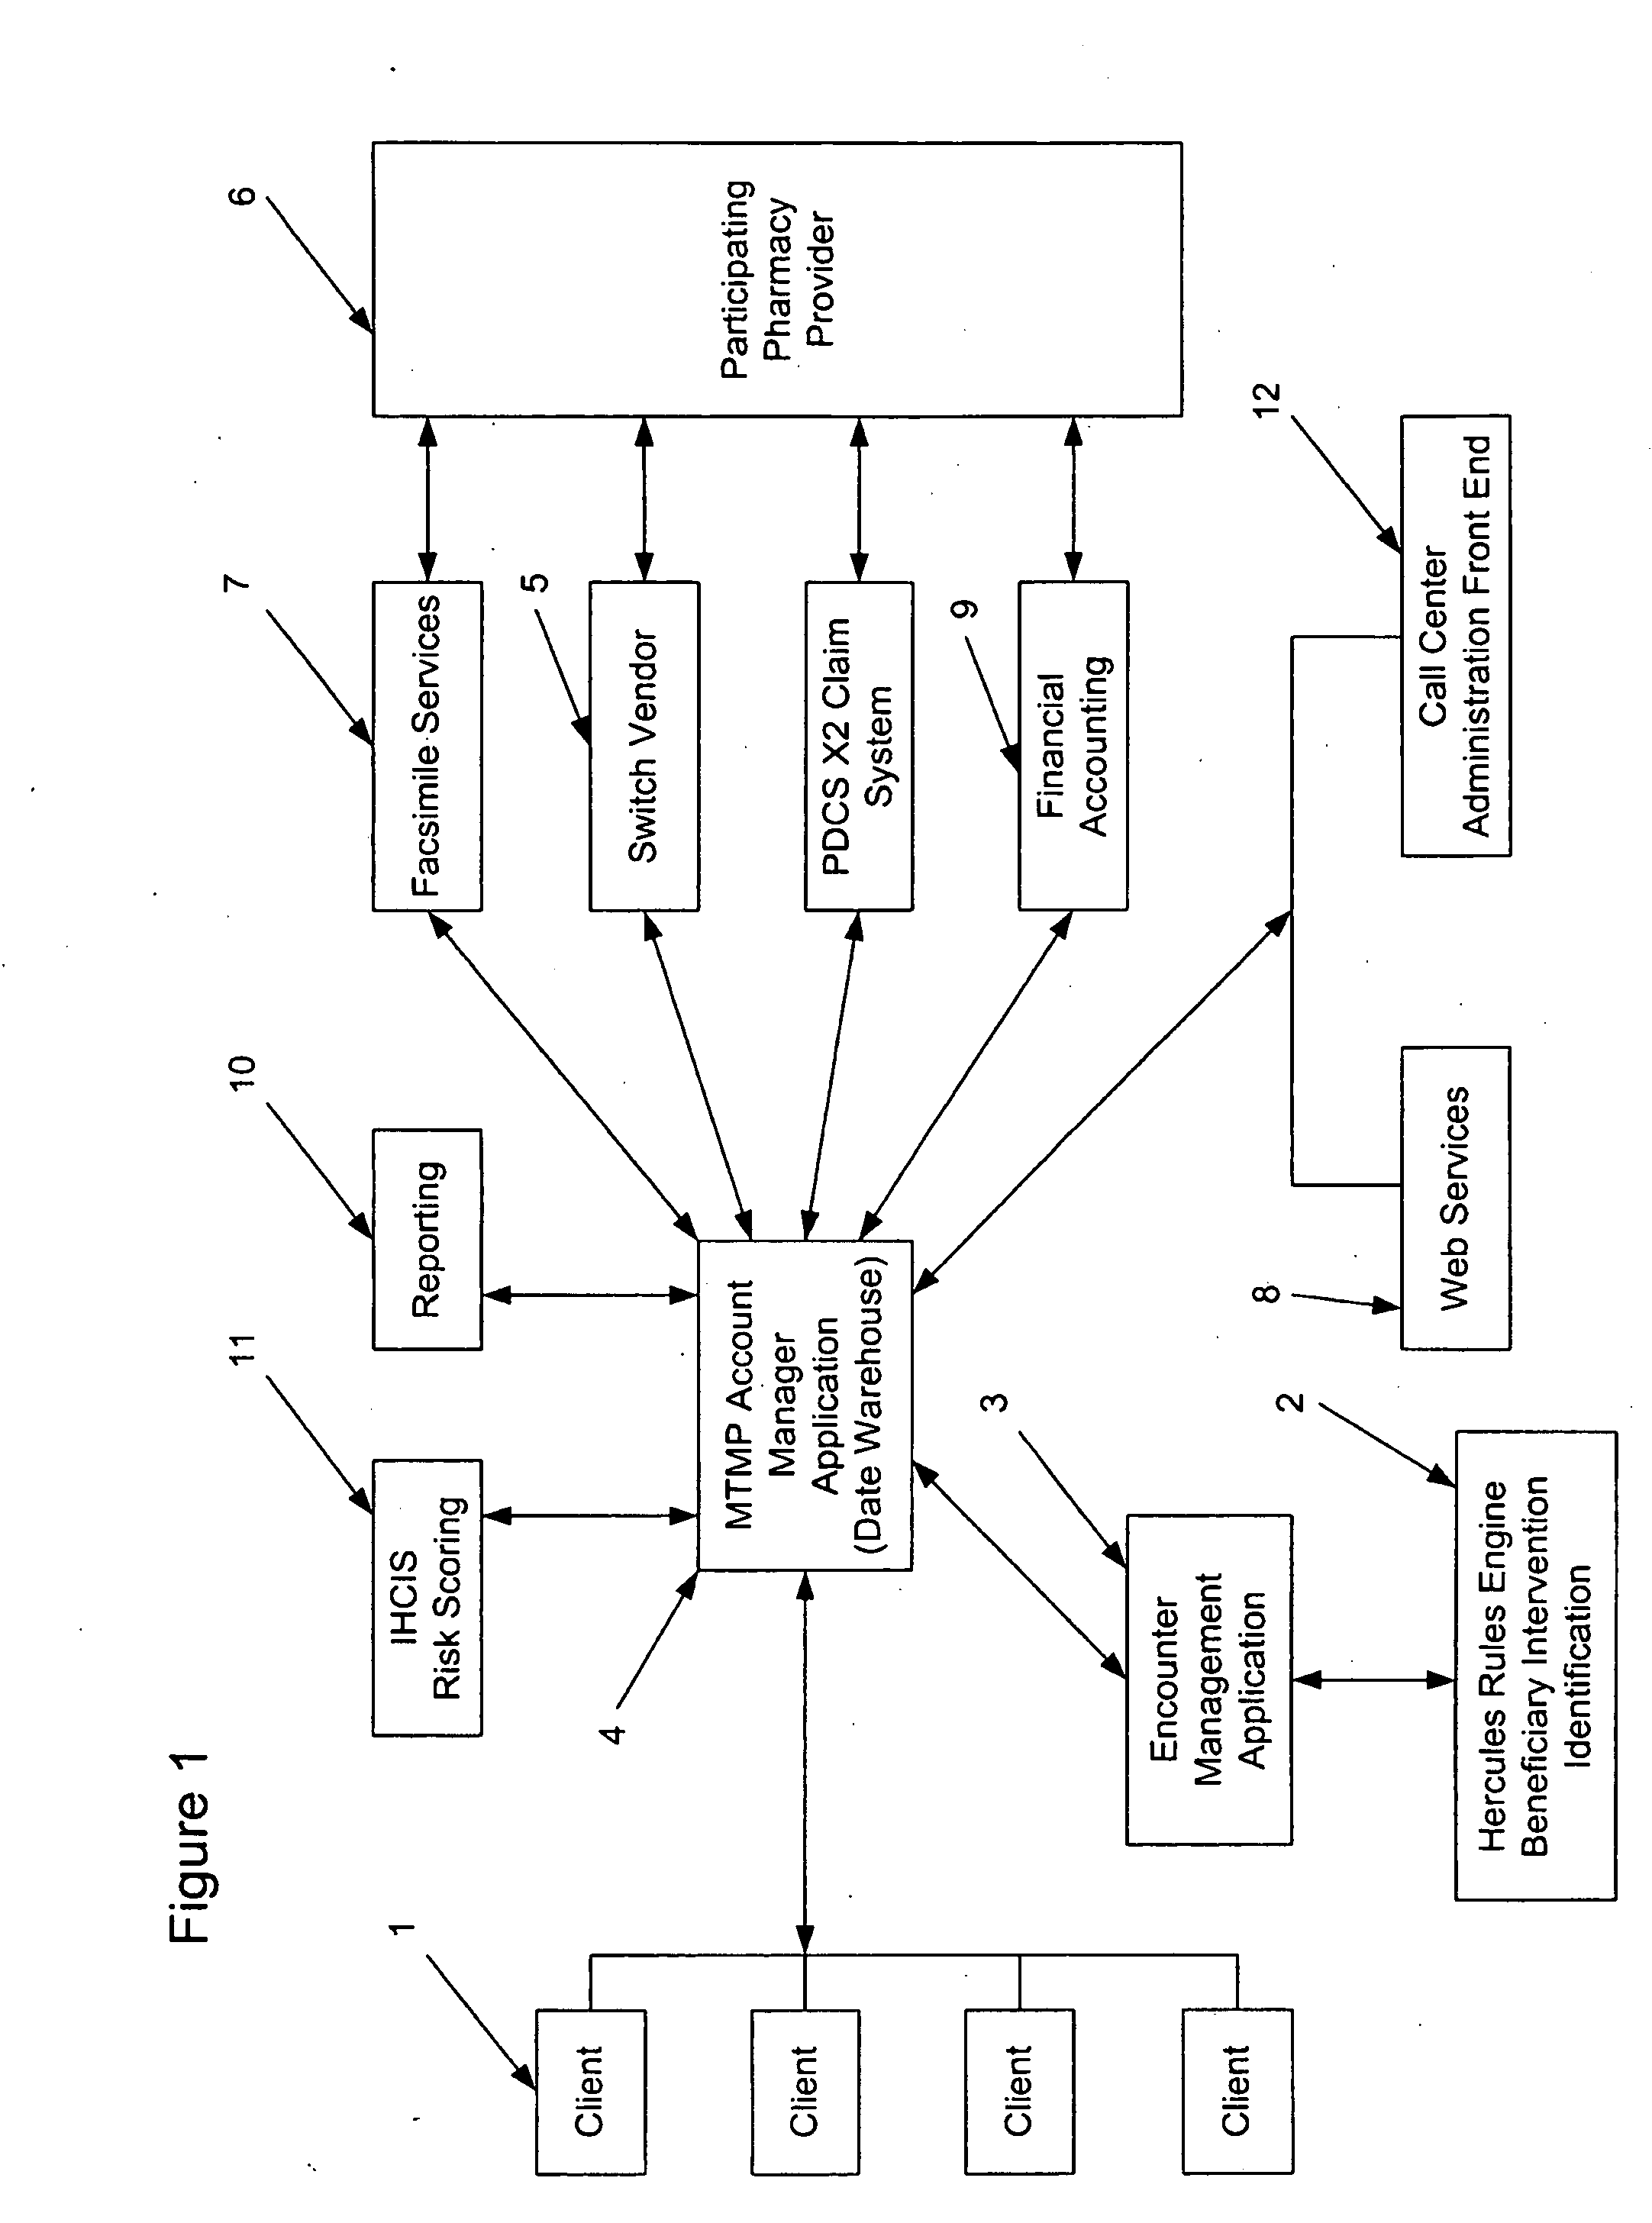 Method of providing enhanced point of service care